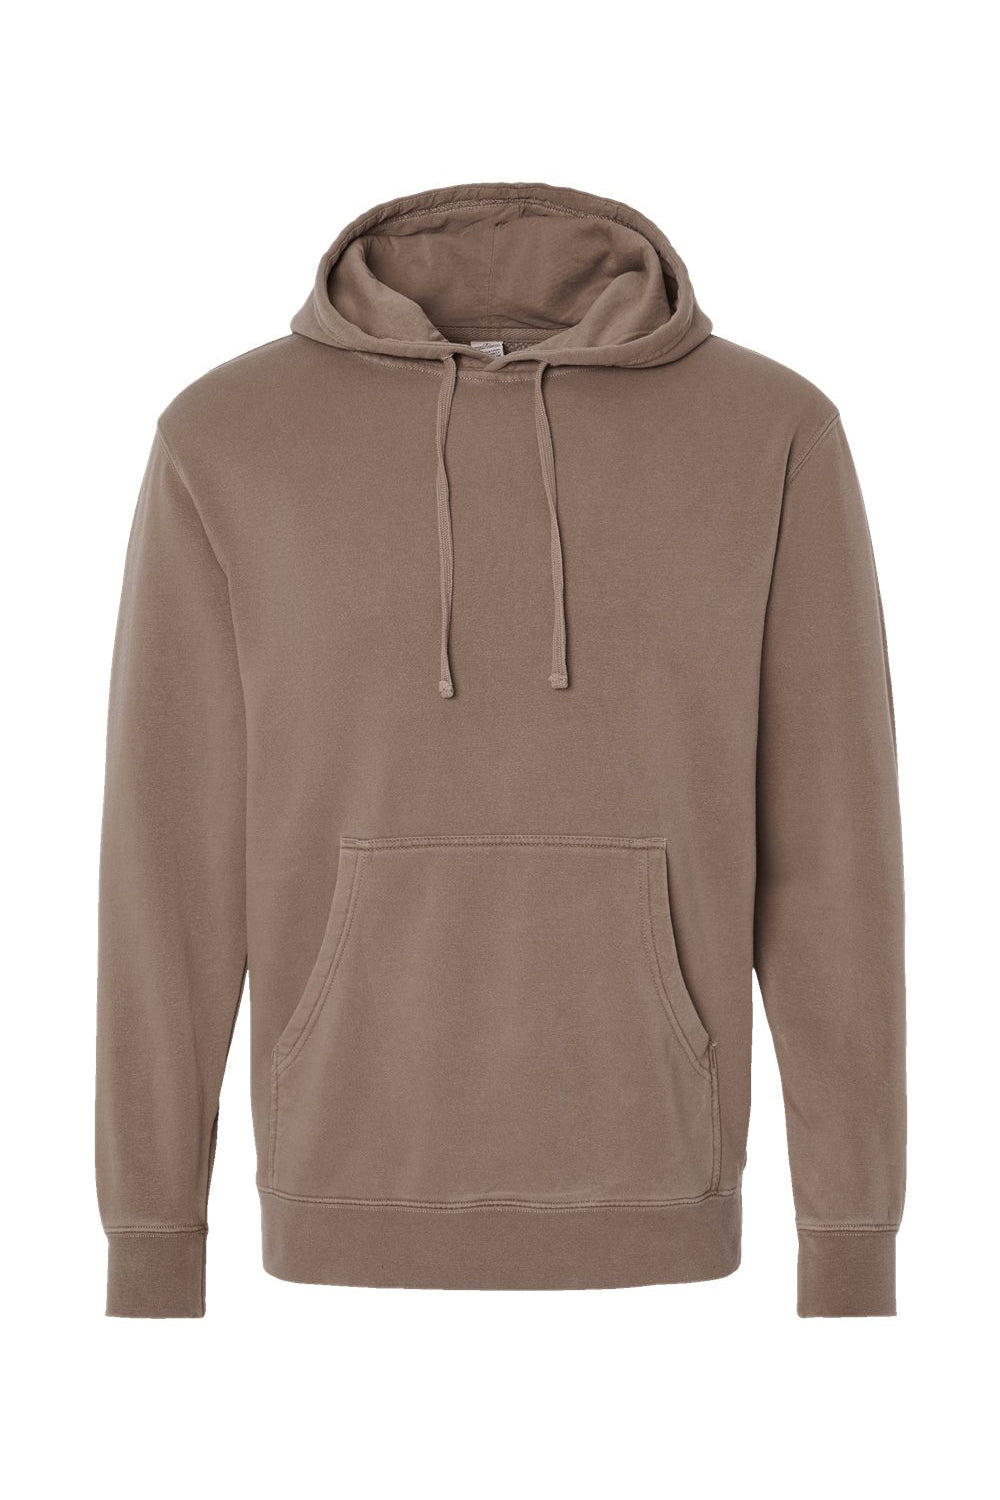 Independent Trading Co. PRM4500 Mens Pigment Dyed Hooded Sweatshirt Hoodie Clay Brown Flat Front